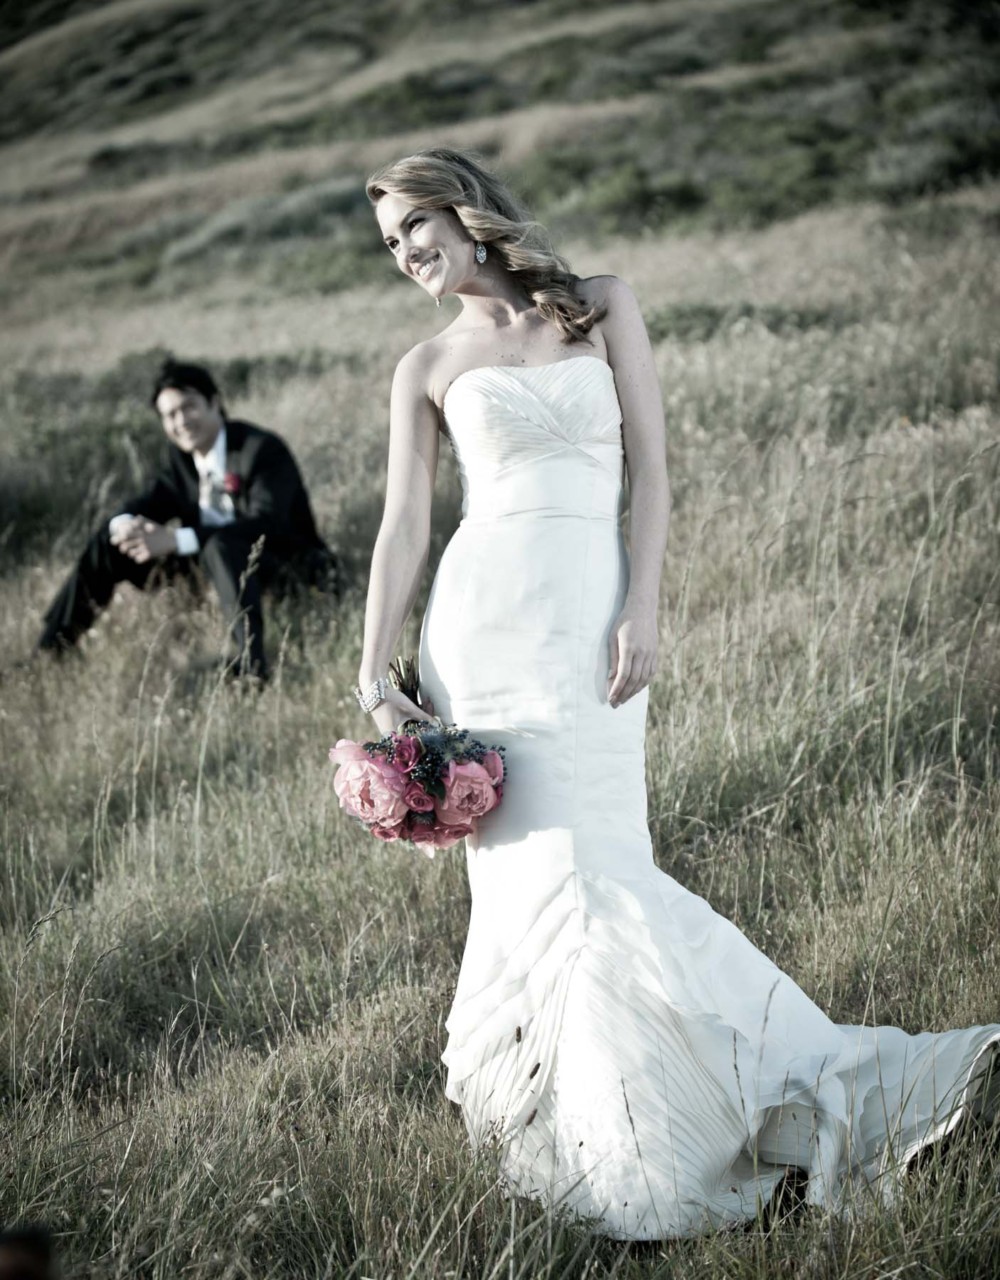 Looking for a destination wedding photographer in Wasilla?